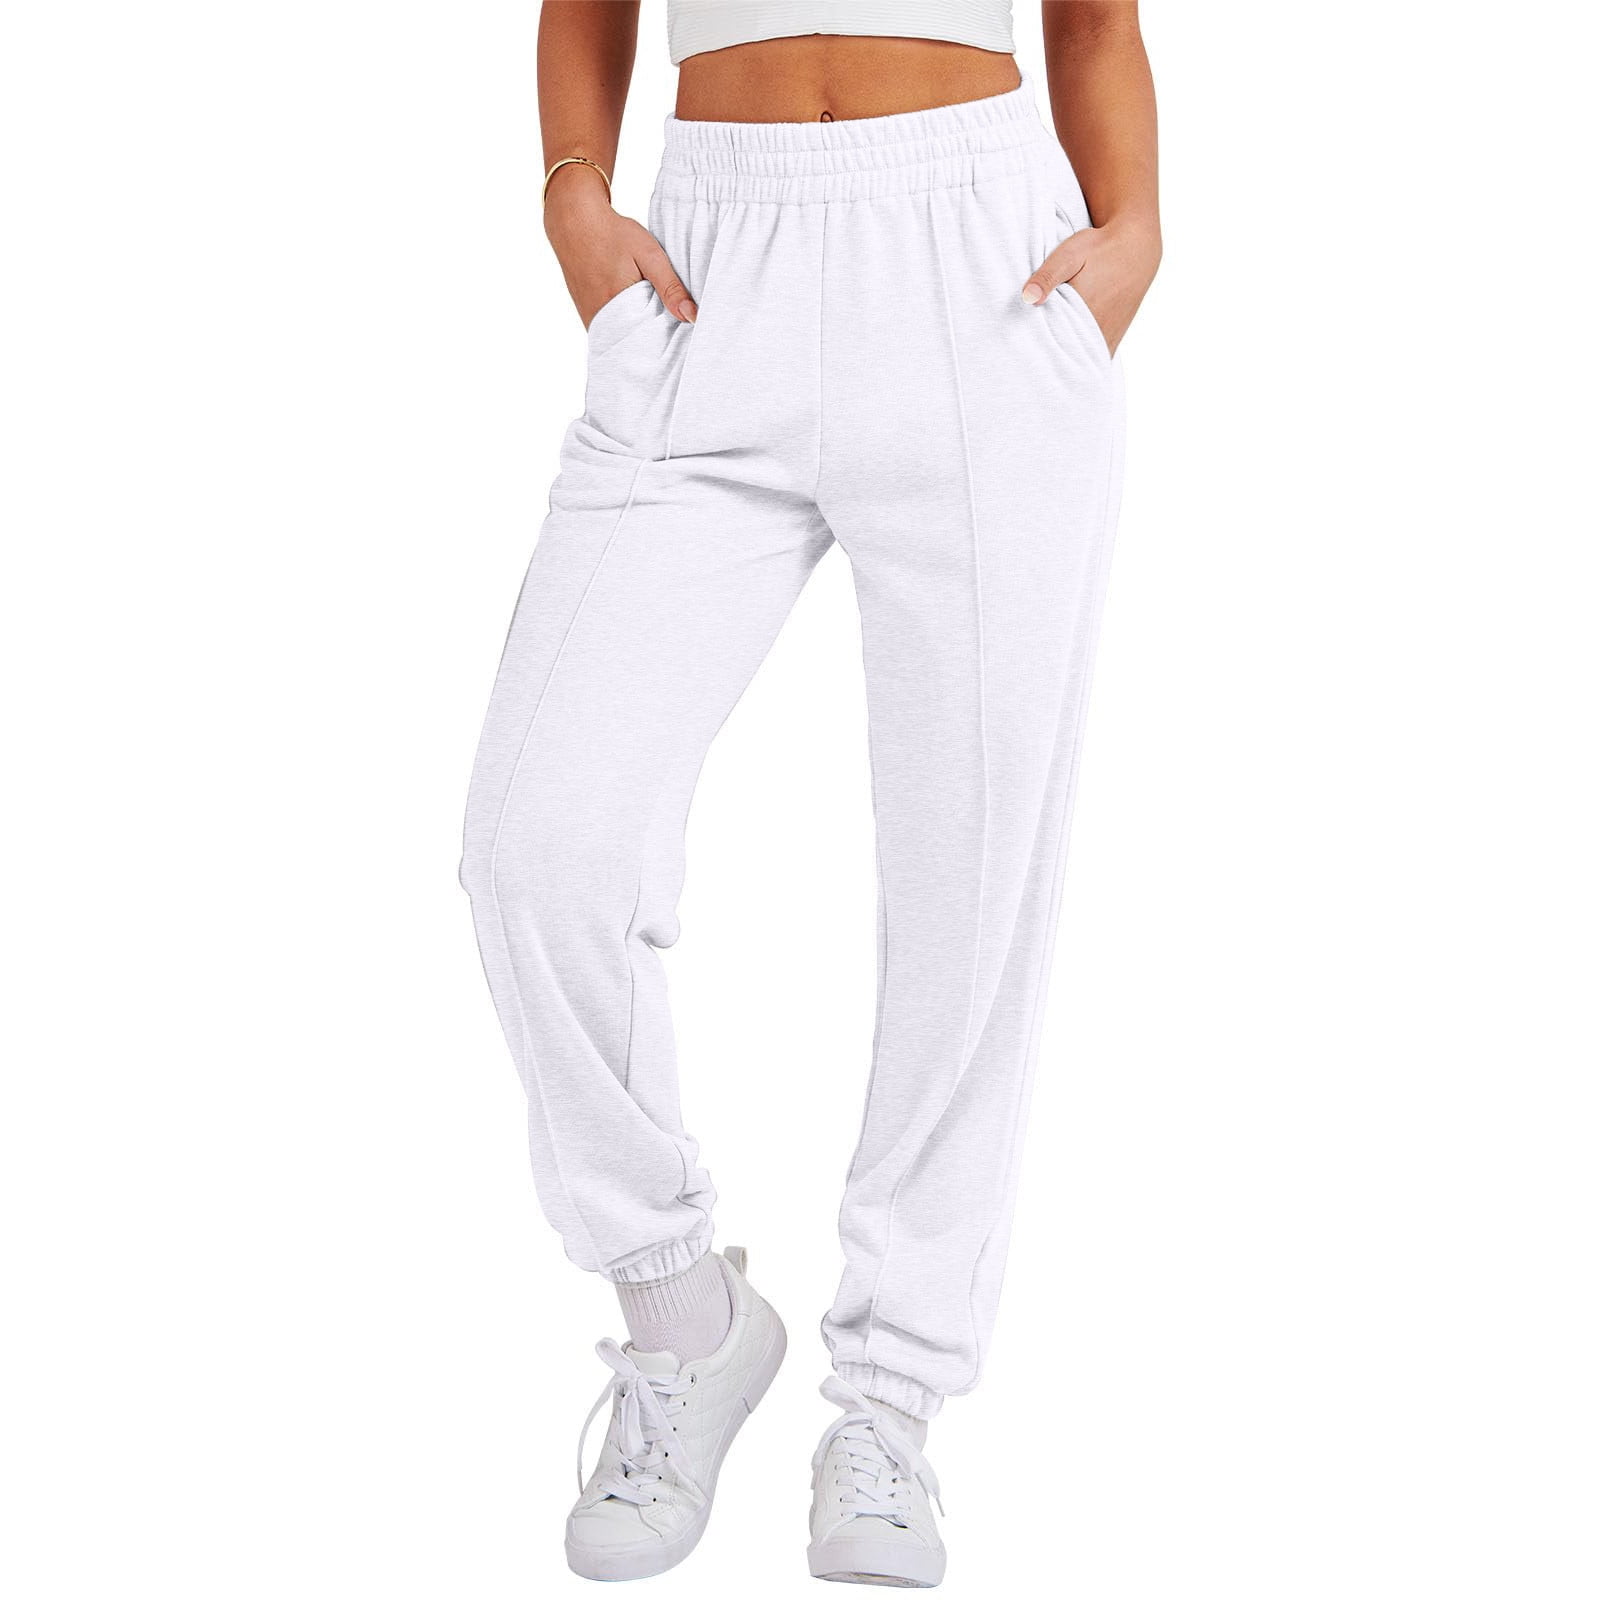 CALAFEBILA Tapered Fall Pants for Women Jogger Straight High Waist Trousers  Casual Solid Long Relaxed Fit Sweatpants 